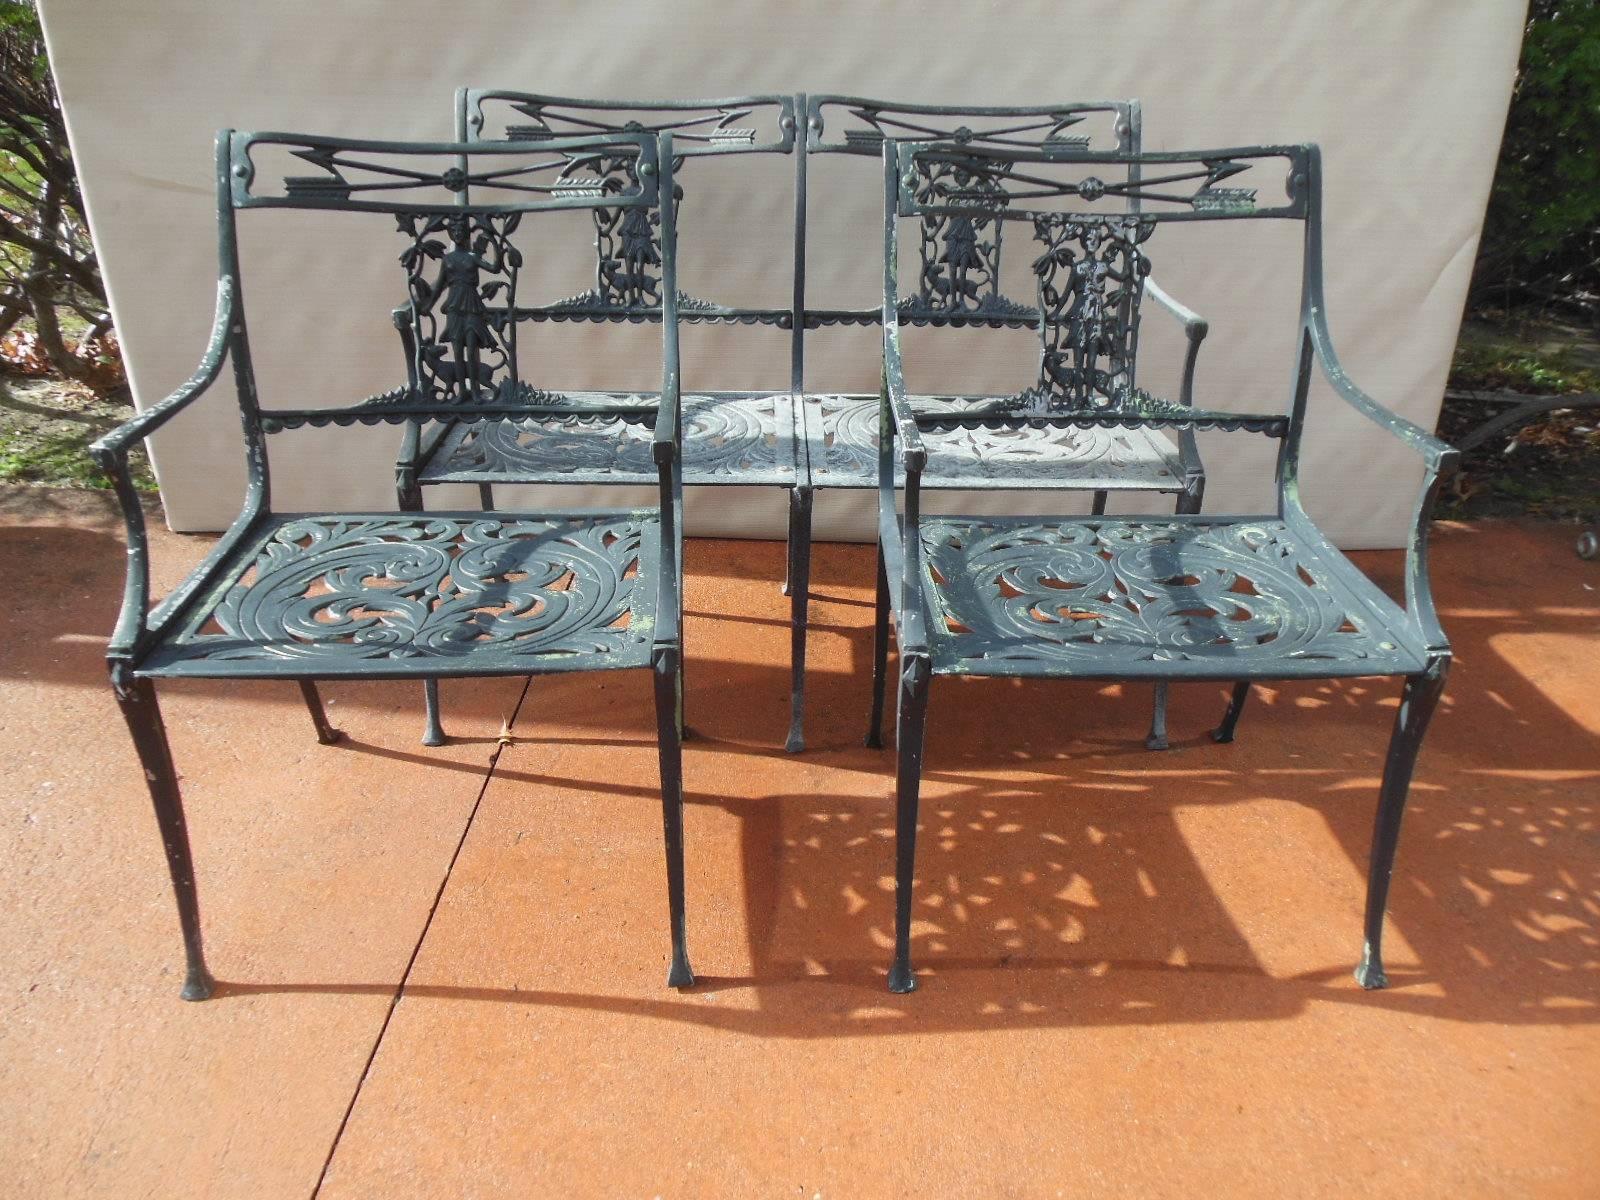 An unusual vintage cast aluminum three piece patio set, consisting of a bench and two armchairs. The set in the desirable Diana the Huntress Pattern, with a central figure of Diana on the chair back. All pieces in the original finish, showing signs